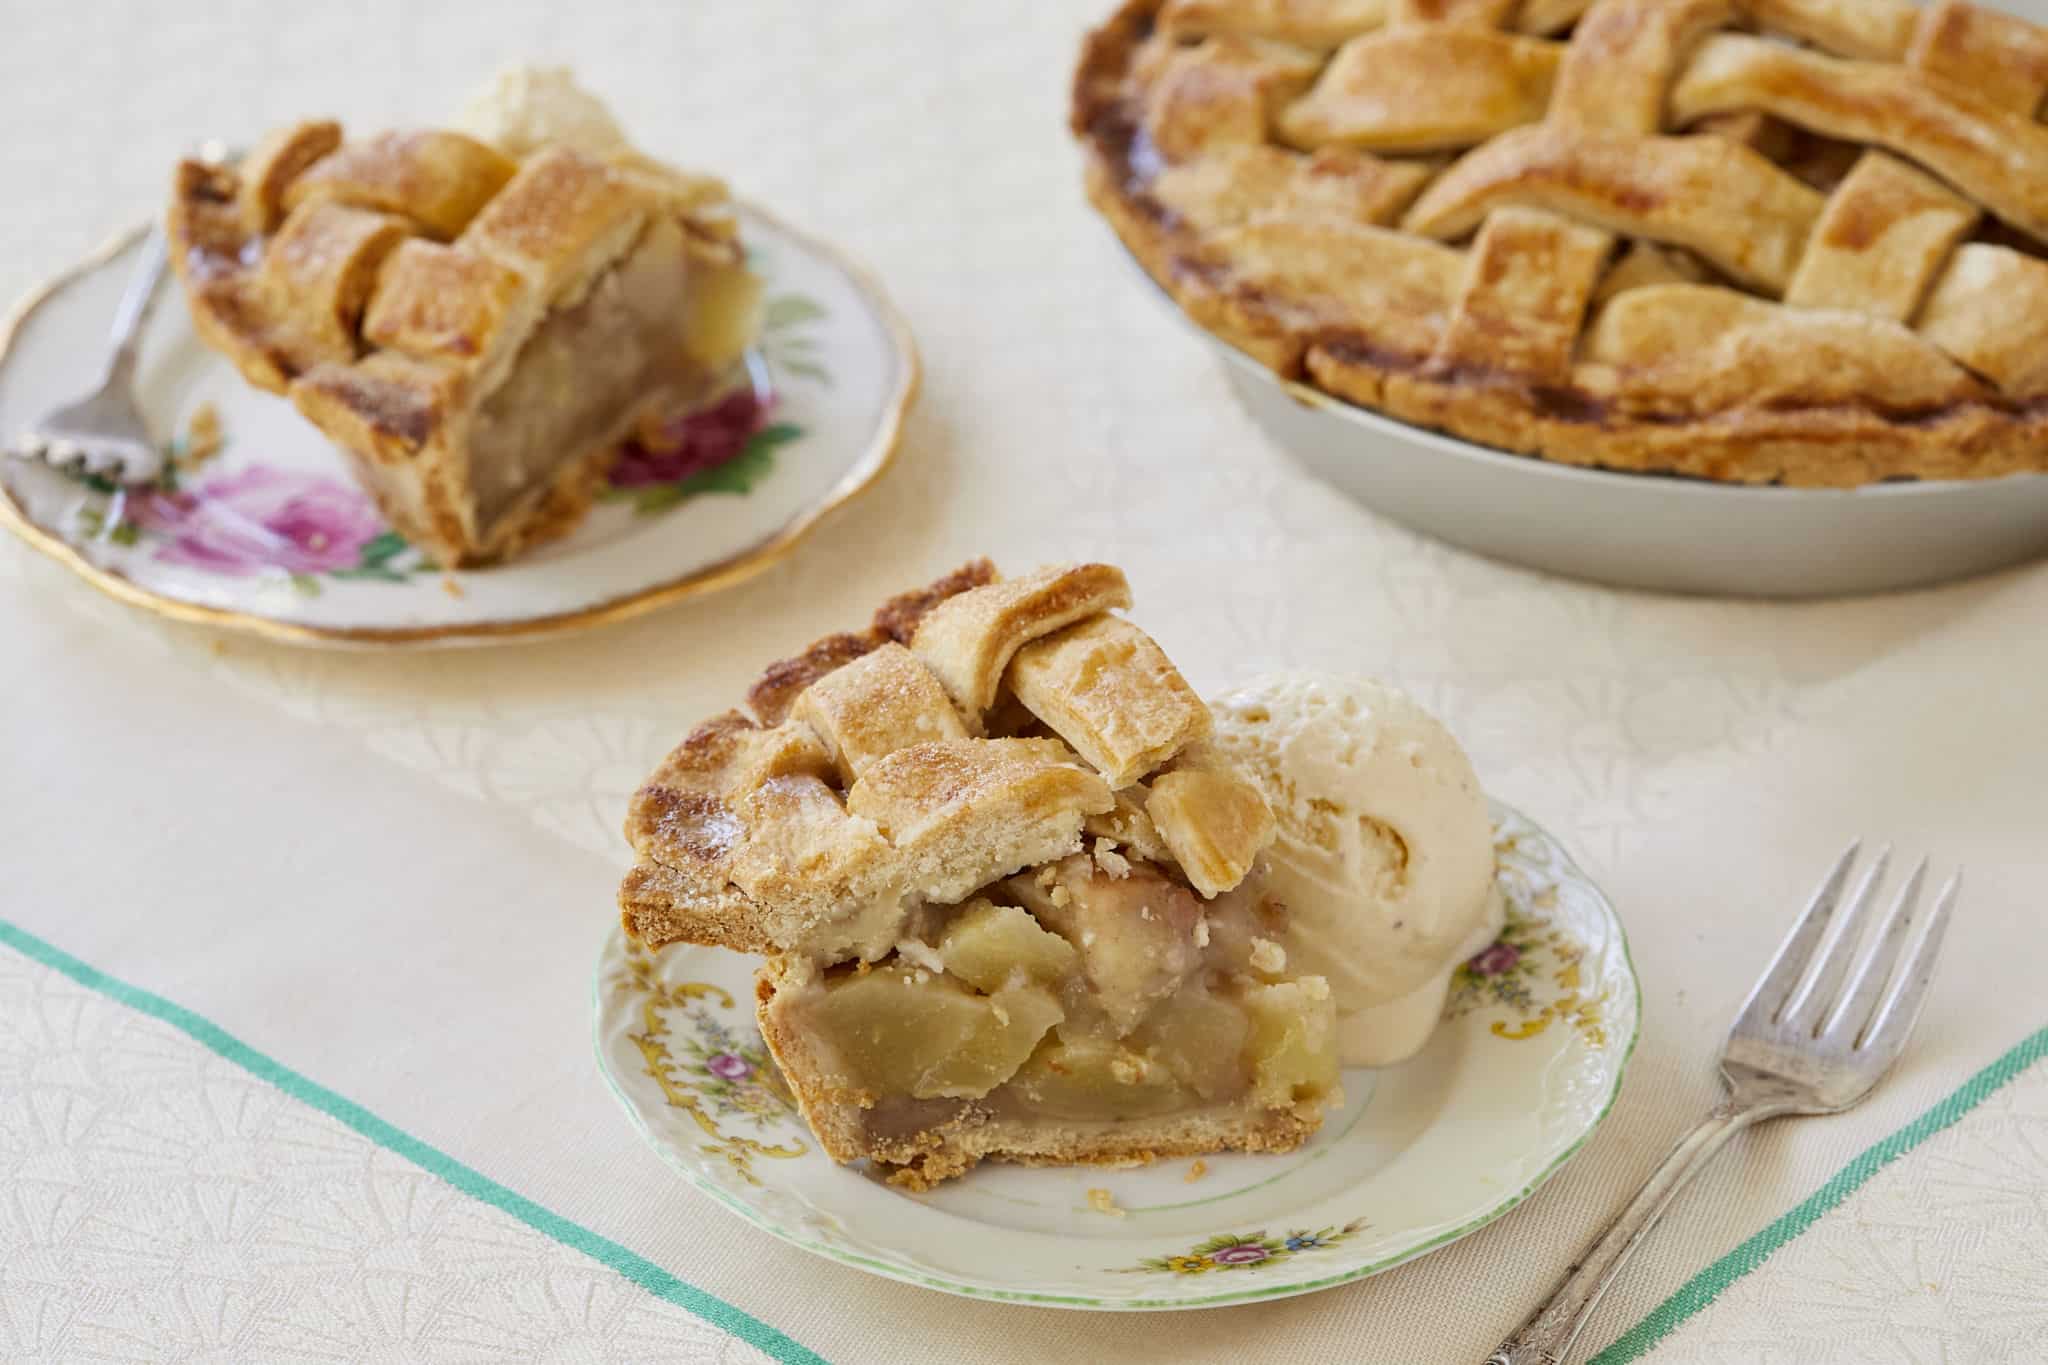 Homemade pear pie is sliced and served on two plates next to the pie remaining in the pie dish. It is served alongside homemade vanilla ice cream.